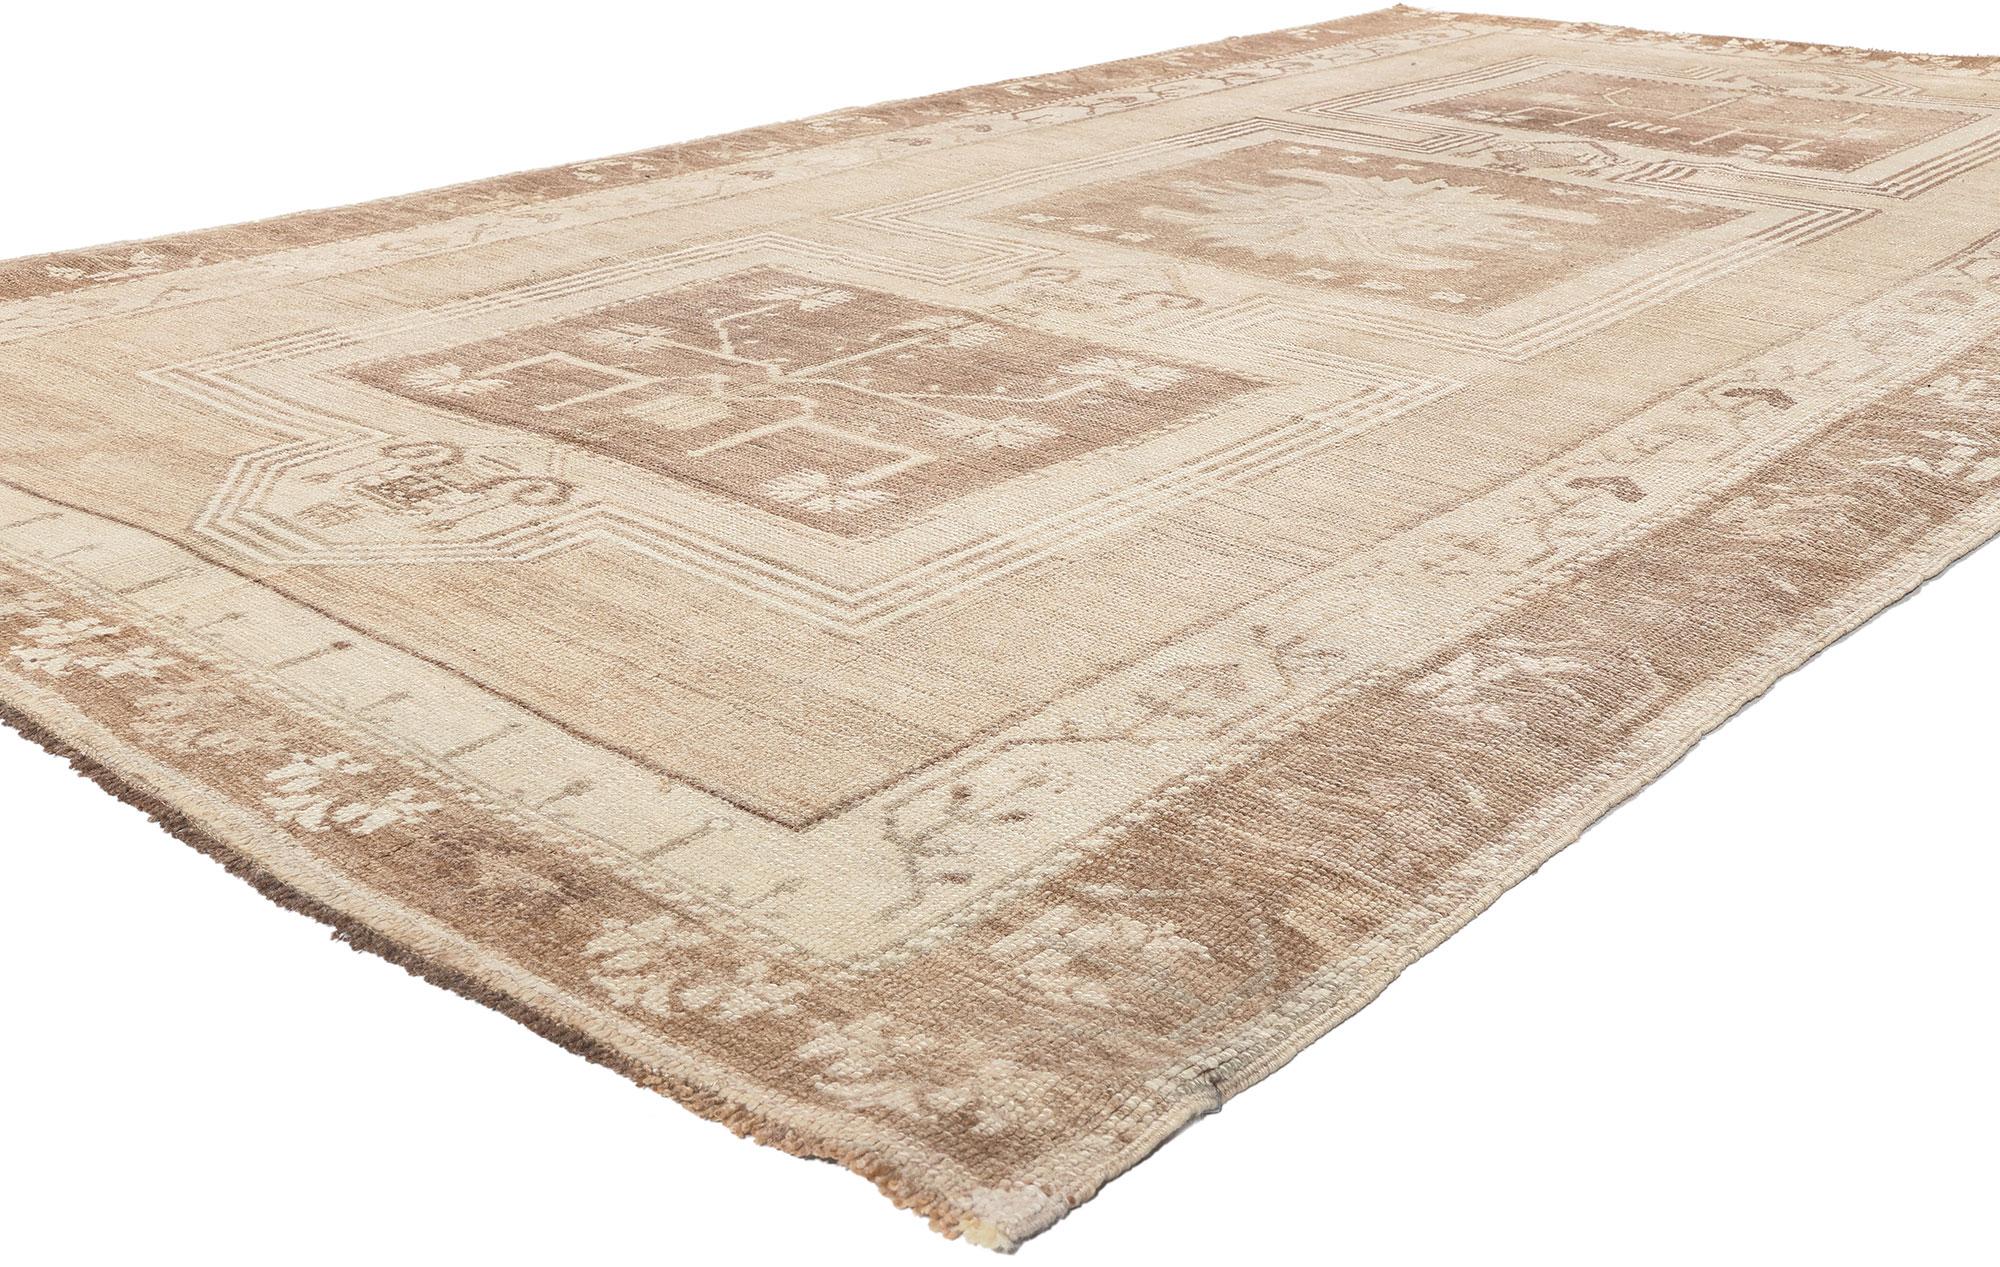 53726 Vintage Turkish Kars Rug, 06'04 x 11'06. Turkish Kars rugs, originating from Turkey, are narrow rugs tailored for hallways, entryways, or tight spaces, boasting earth-tone colors like browns, tans, beiges, and warm hues for a cozy atmosphere.